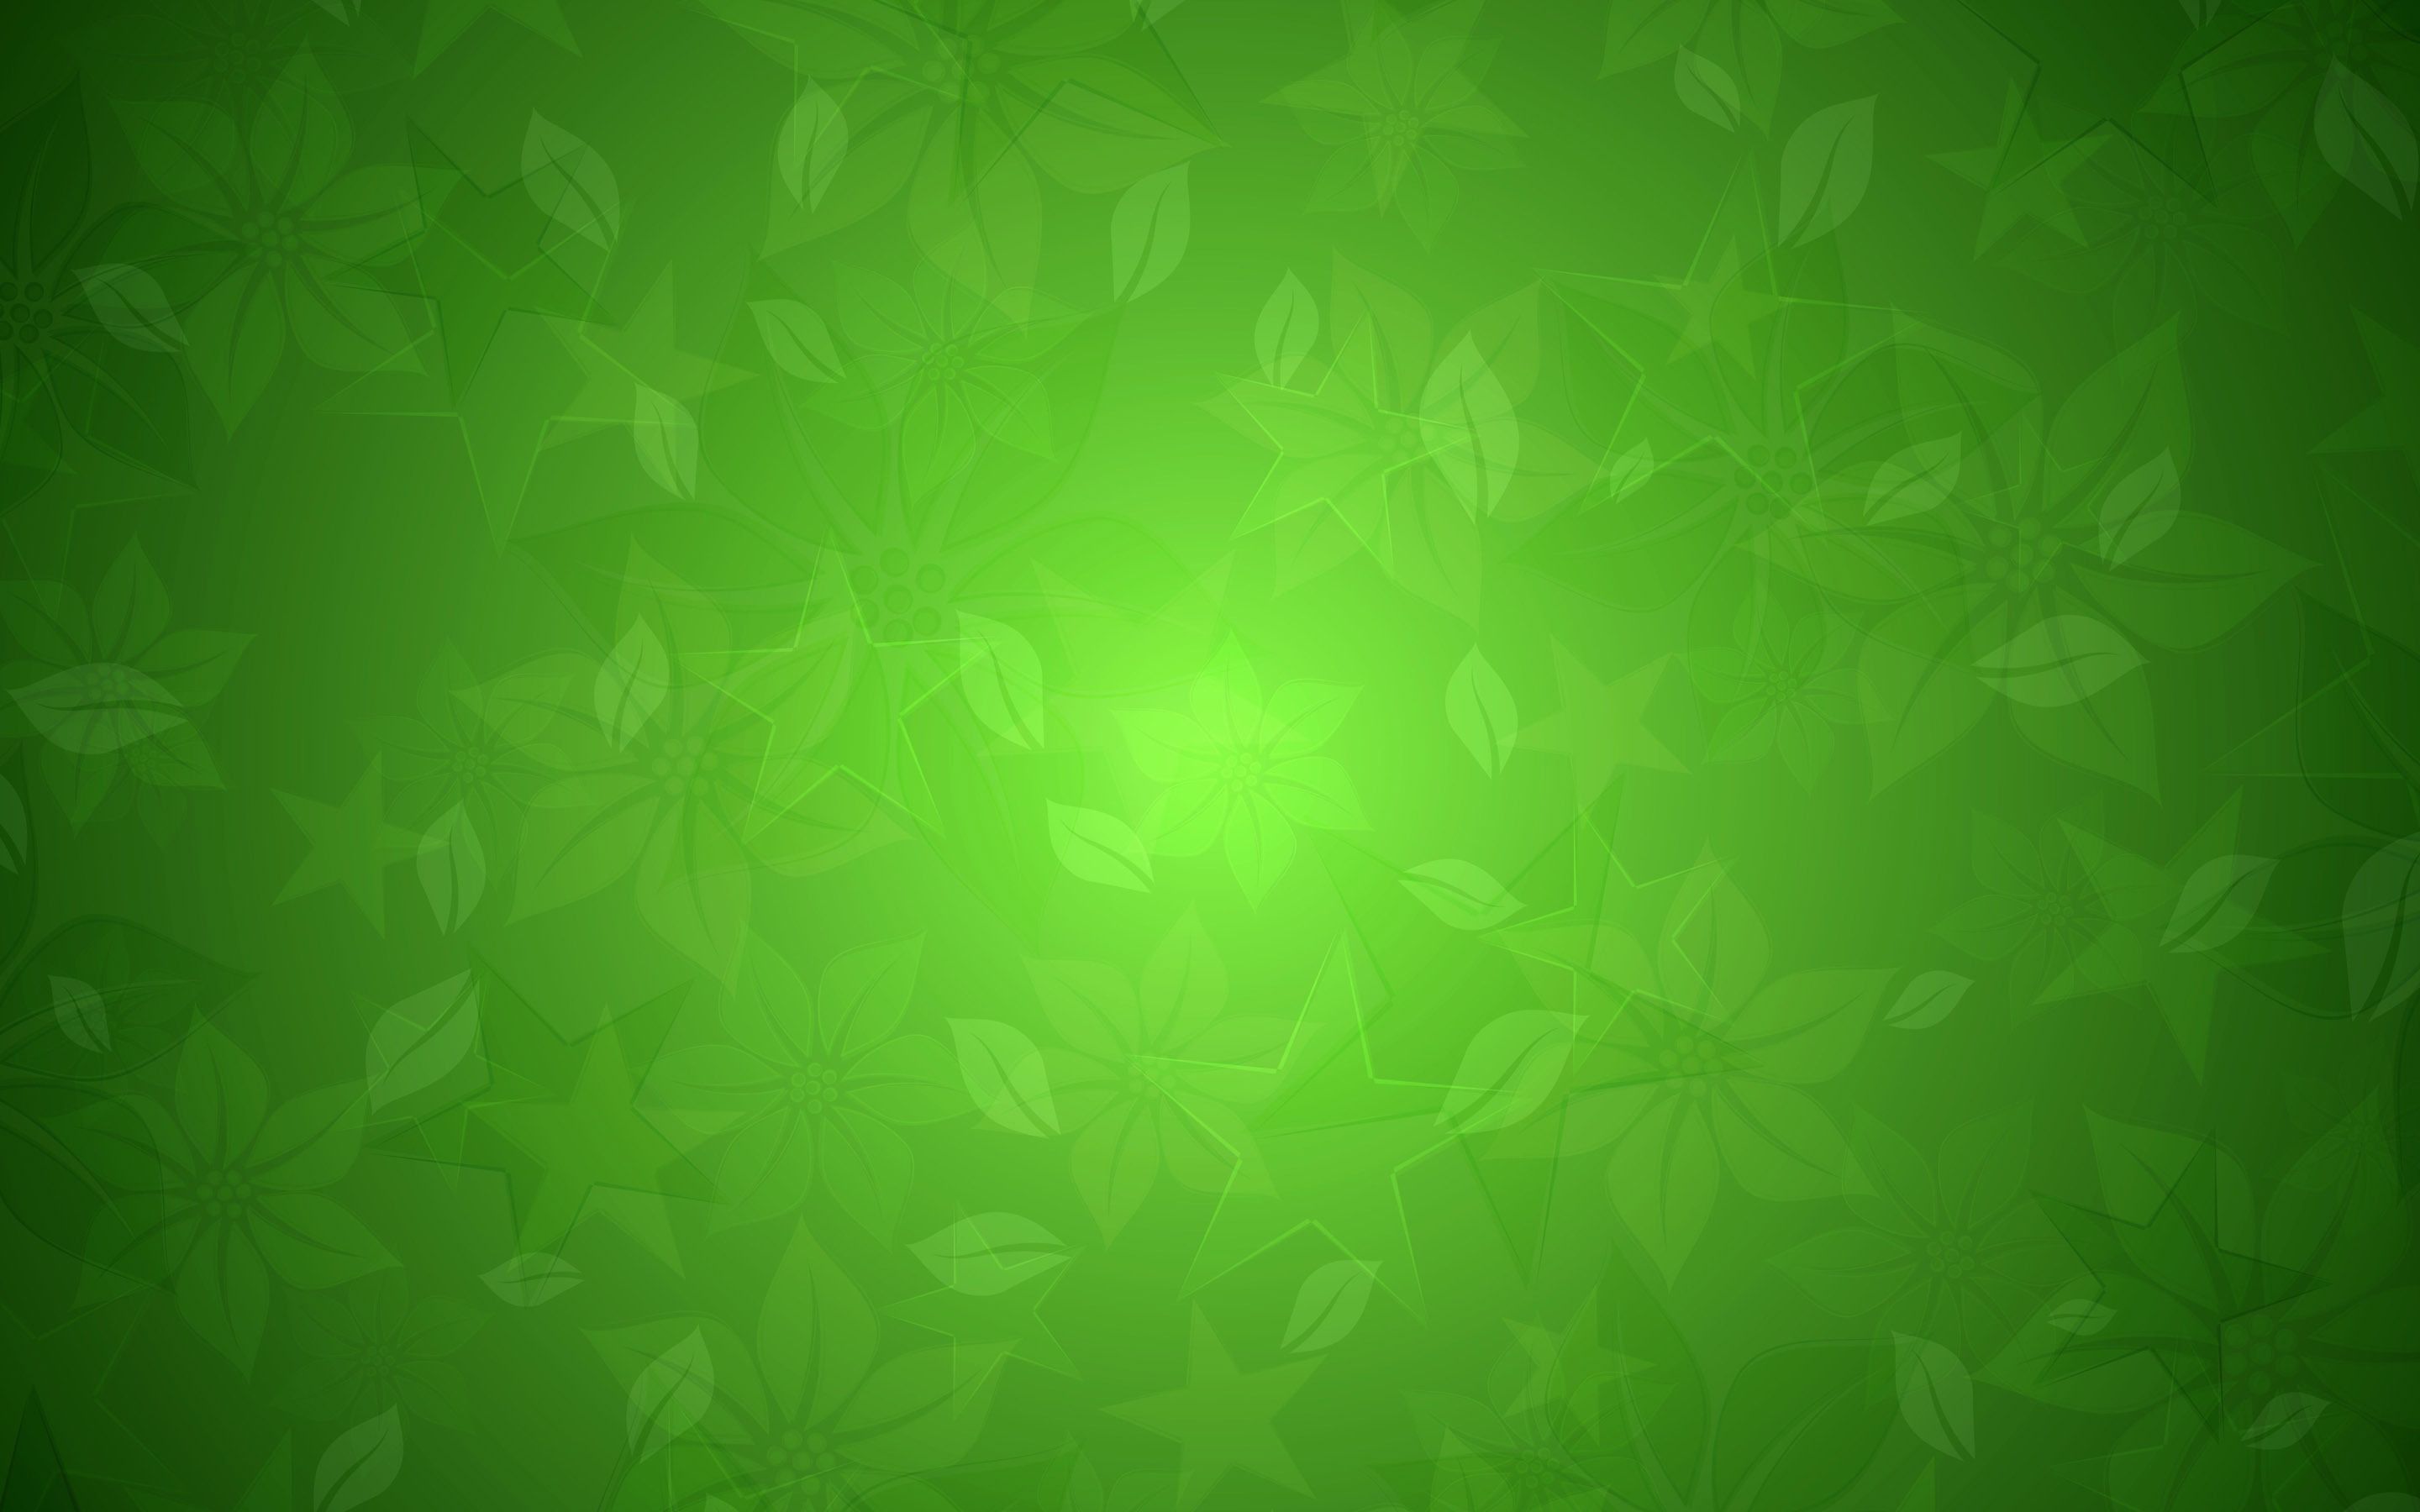 10 High Res Beautiful Green Floral Wallpaper Patterns - Free